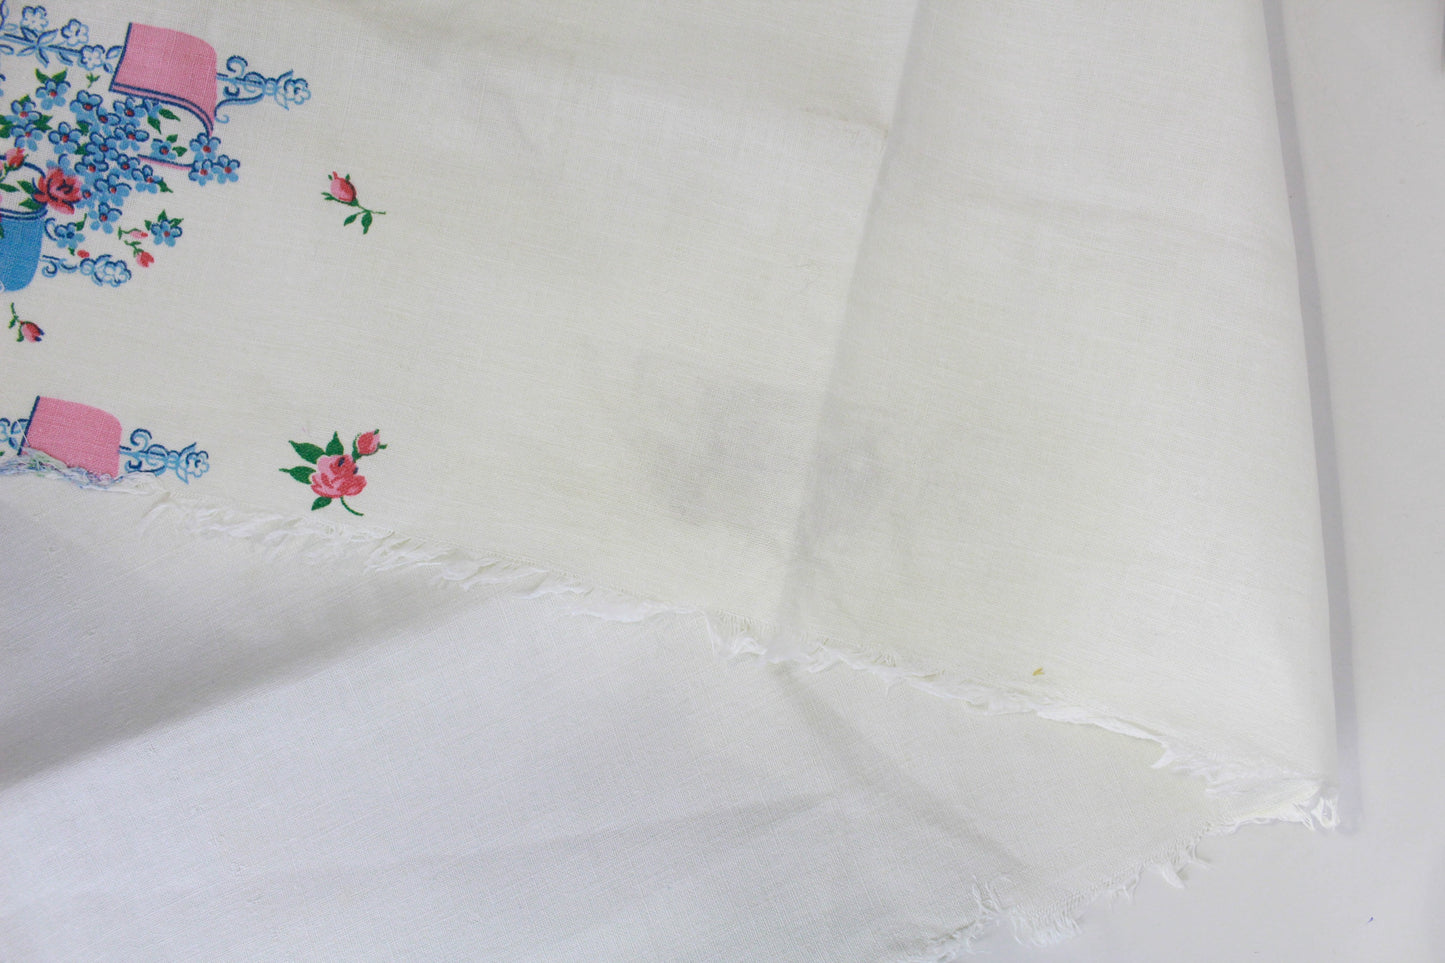 1940s Border Print Feedsack, Blue and Pink Flowers, Cotton Sewing Fabric